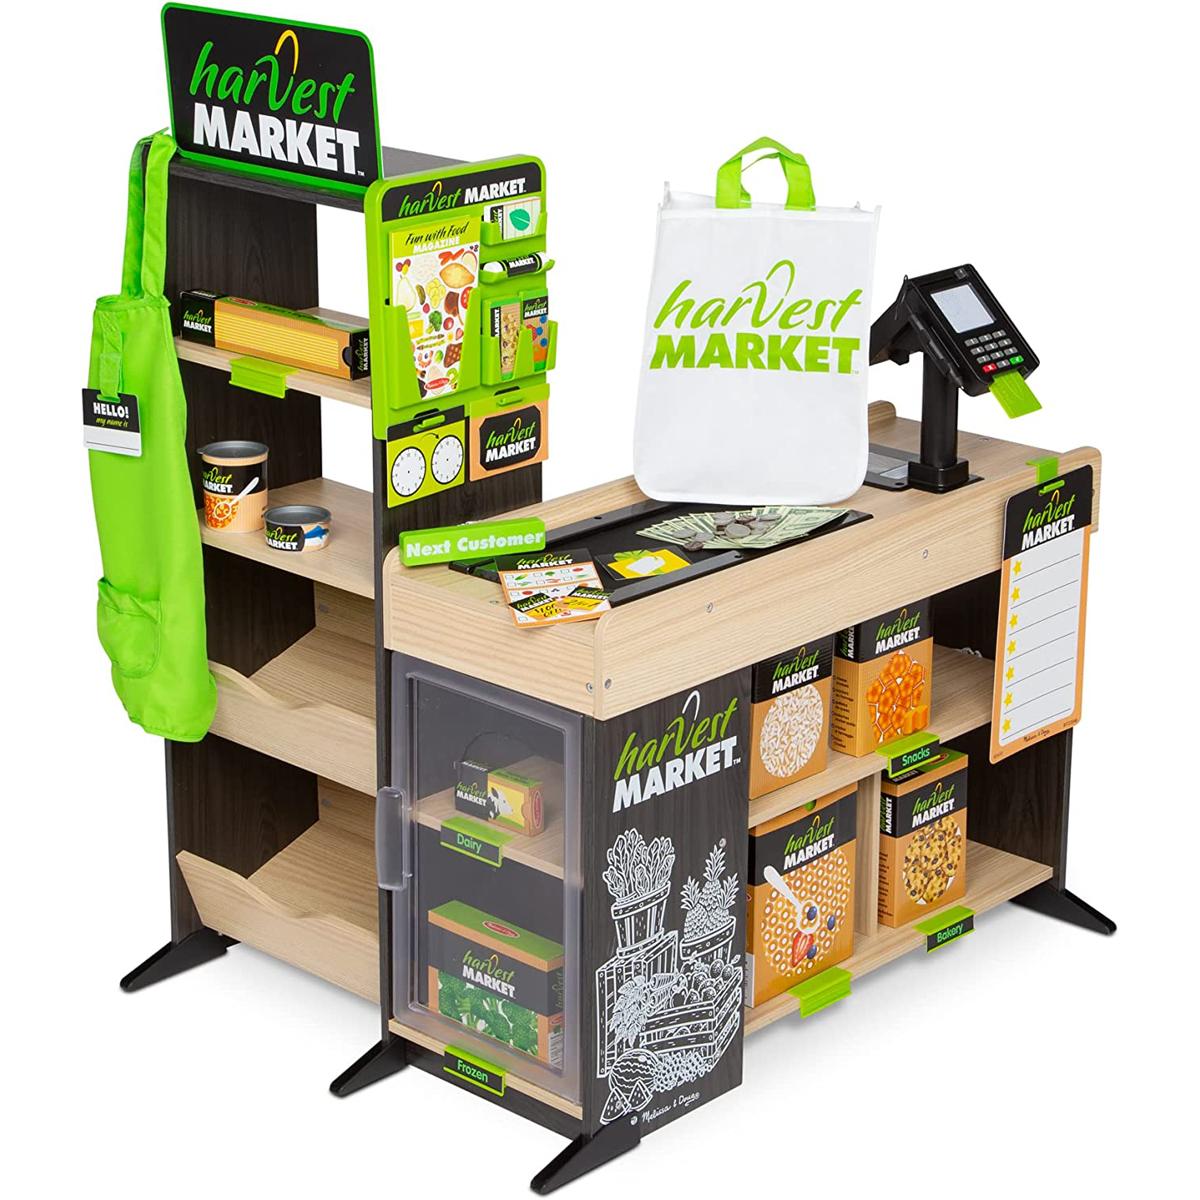 Melissa and Doug Harvest Market Grocery Store Bundle for $99.99 Shipped